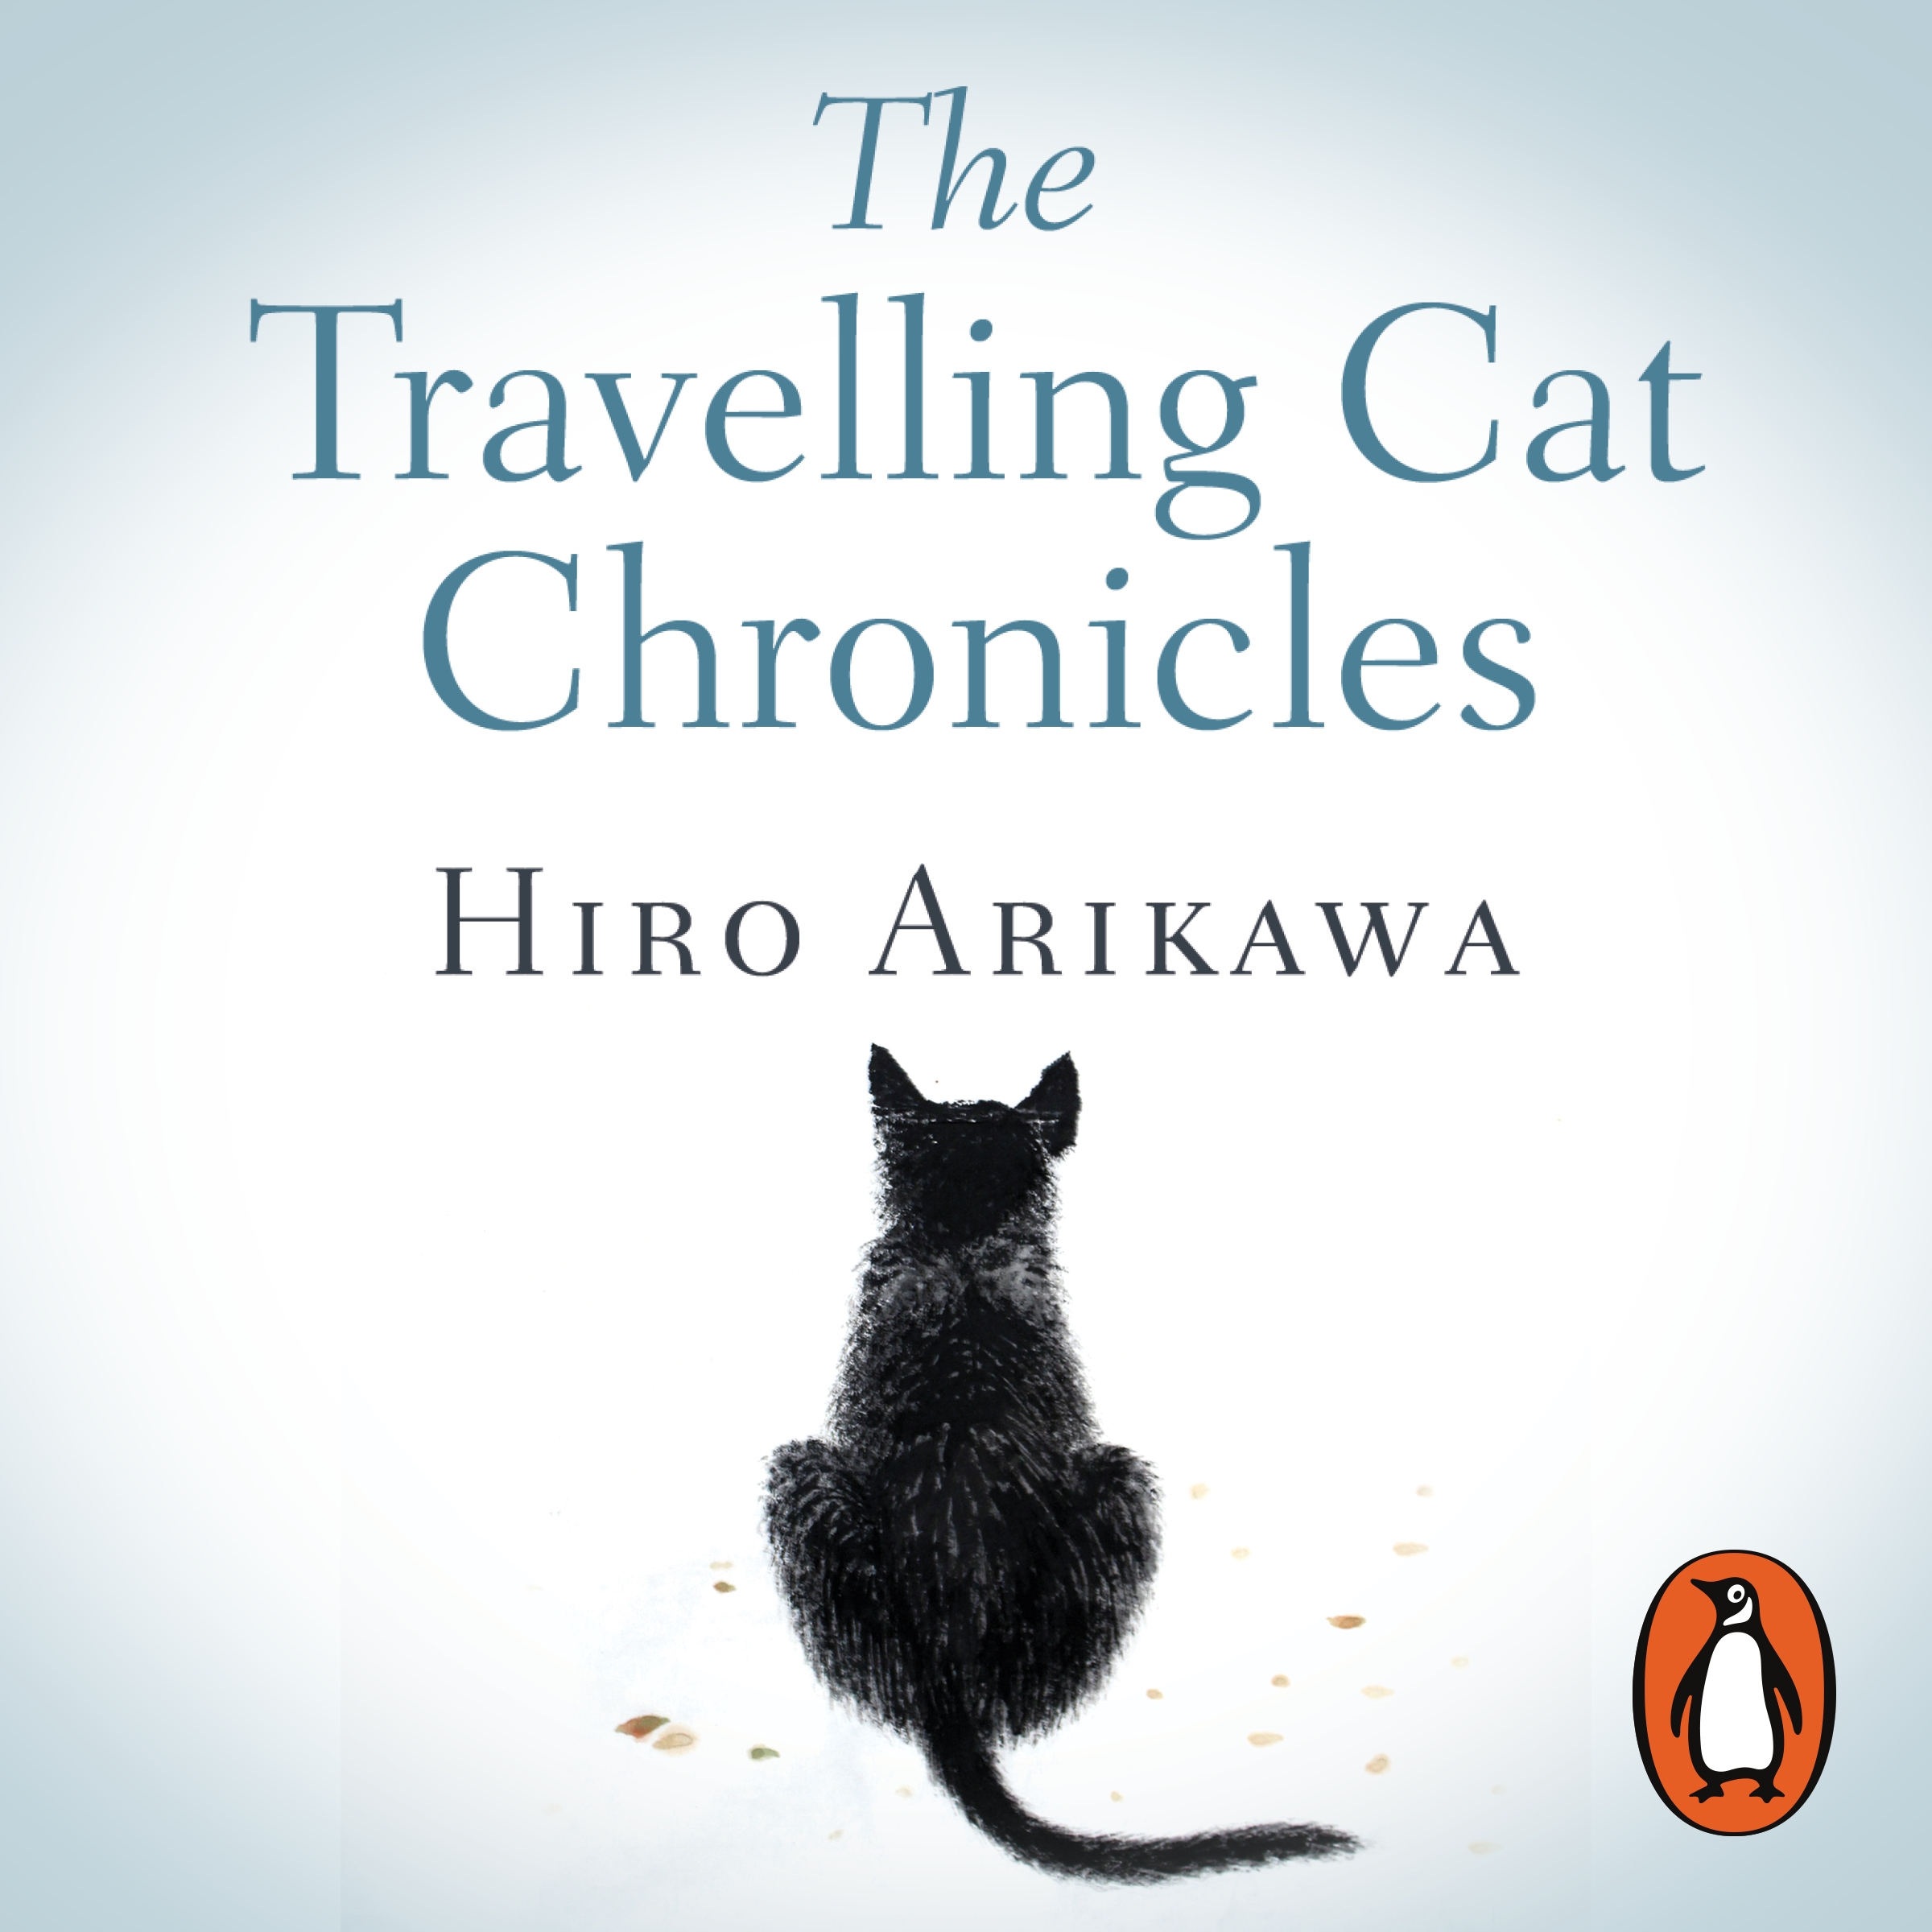 the chronicles of the travelling cat